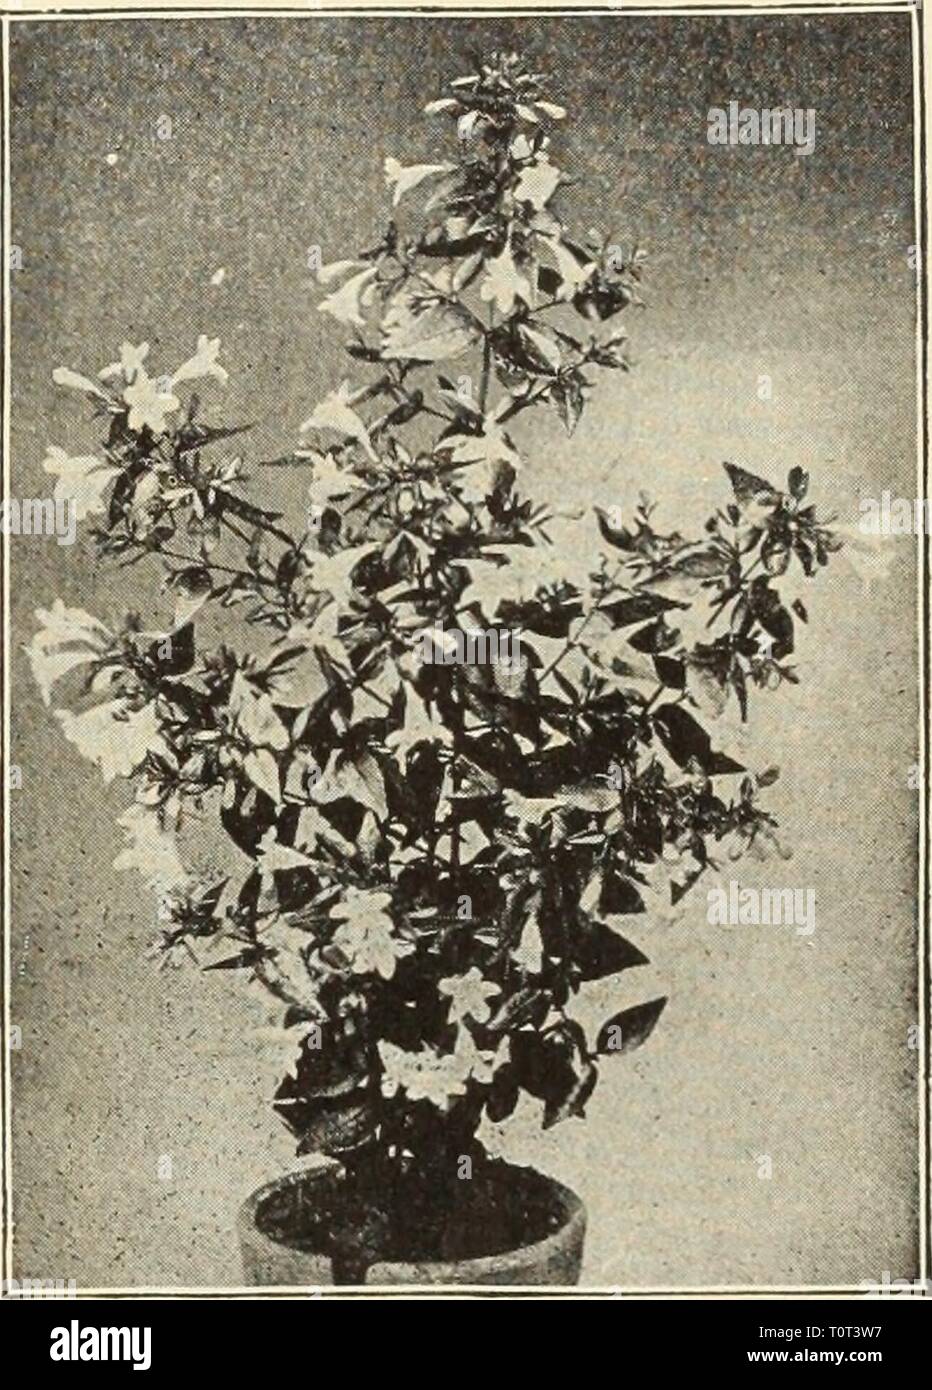 Dreer's garden book  seventy-sixth Dreer's garden book : seventy-sixth annual edition 1914  dreersgardenbook1914henr Year: 1914  Ai-THKA Alba Plena. Abelia Chinensis Grandifloha. Abelia Chinensis Qrandiflora. A choice, small Shrub of graceful habit, producing through the entire summer and fall months white tinted lilac heather-like flowers in such abundance as to completely cover the plant. (See cut.) 25 cts. each; $2.50 per doz. Althea (Rose of Sharon). The ,ltheas are among the most valuable of our tall hardy Shrubs on account of their late season of blooming, which is from August to Octobe Stock Photo